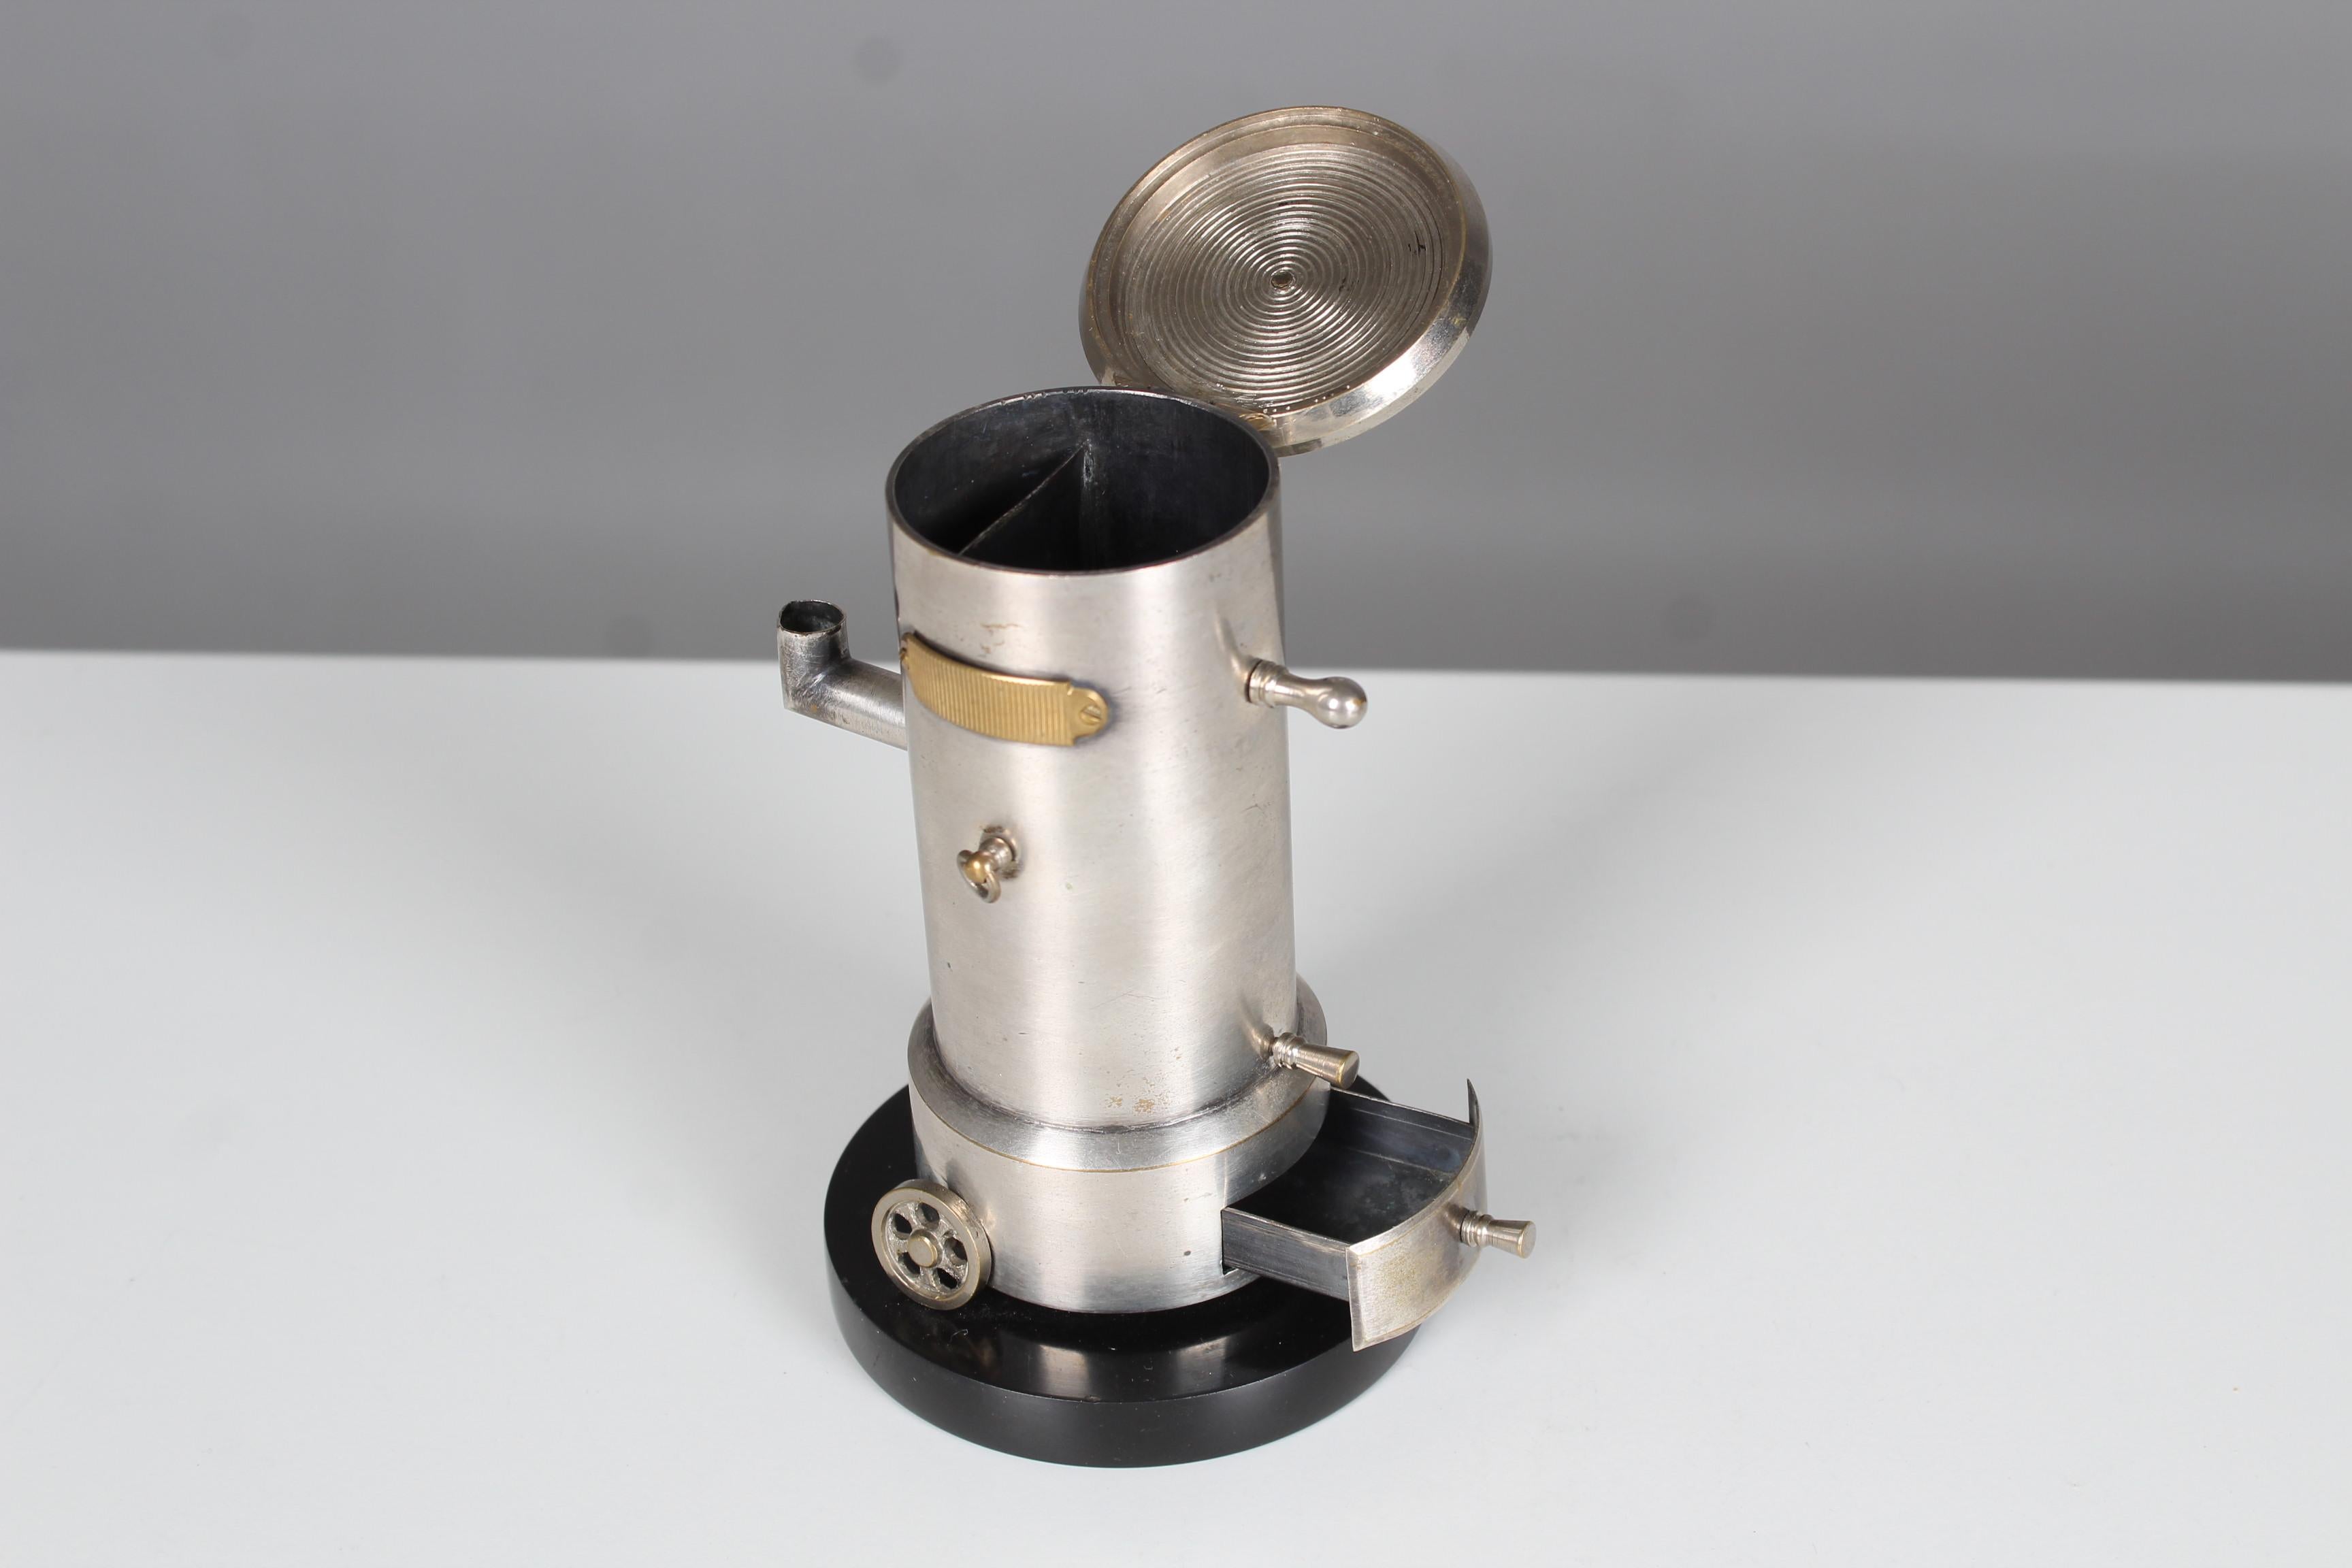 French Antique Pyrogene, Smoking Utensil, France, Miniature Stove, Early 20th Century